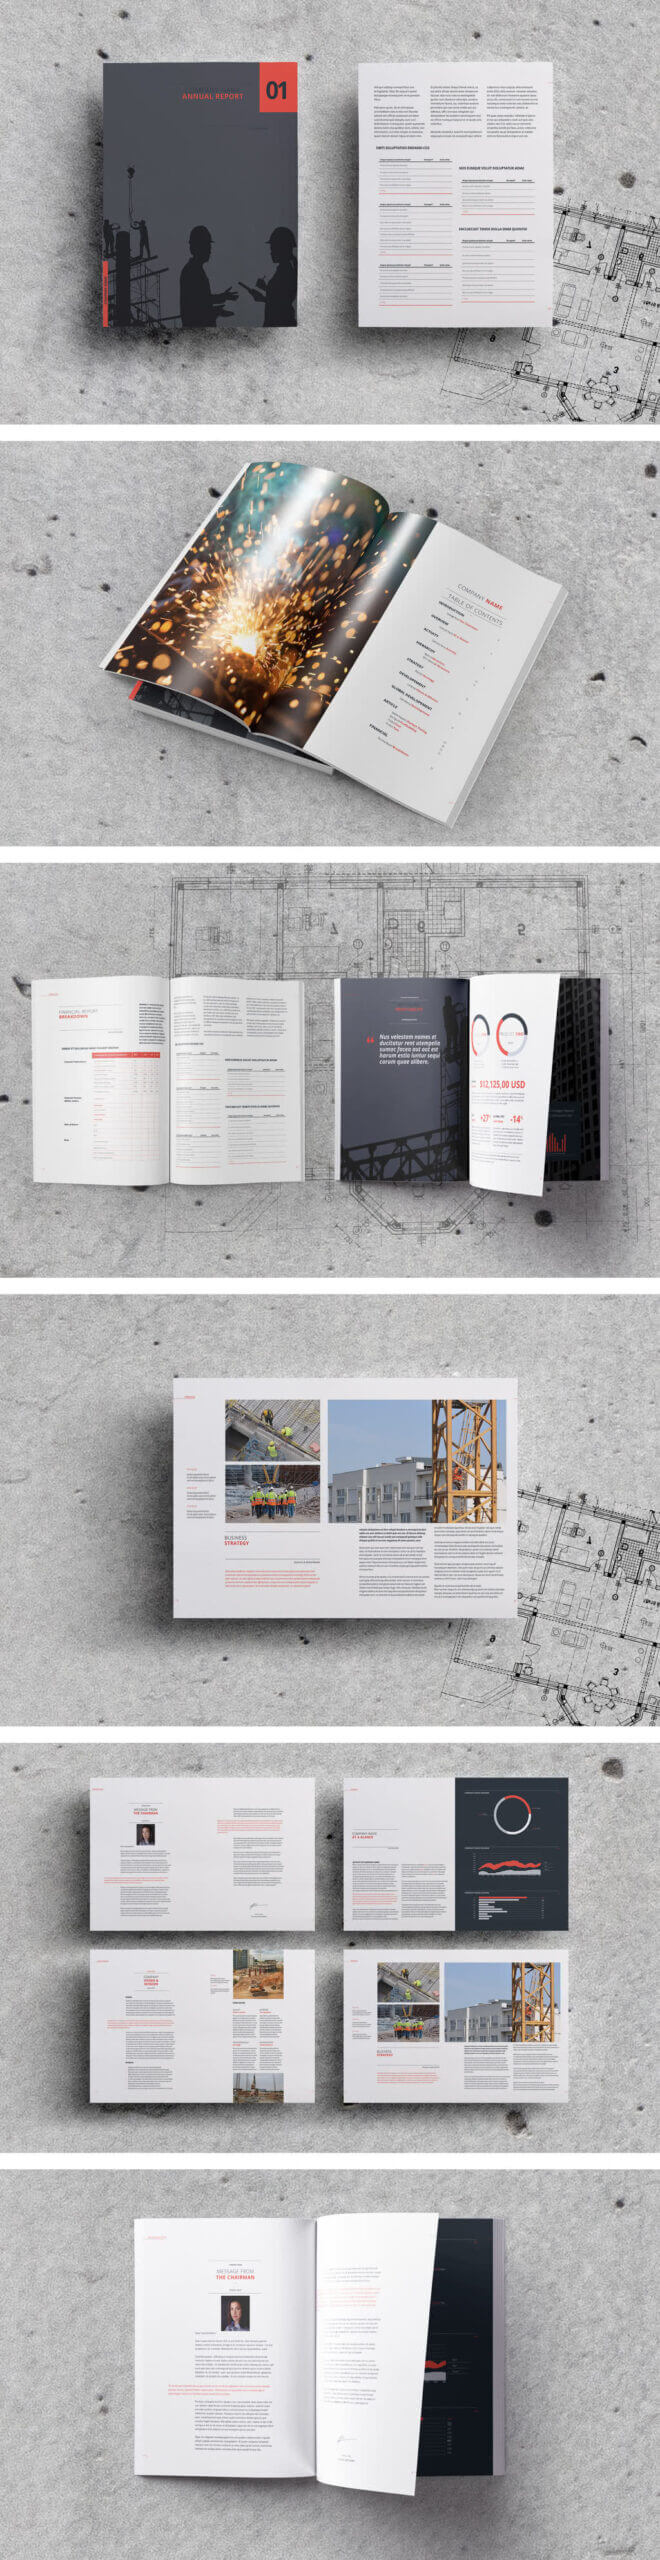 75 Fresh Indesign Templates And Where To Find More Within Free Annual Report Template Indesign